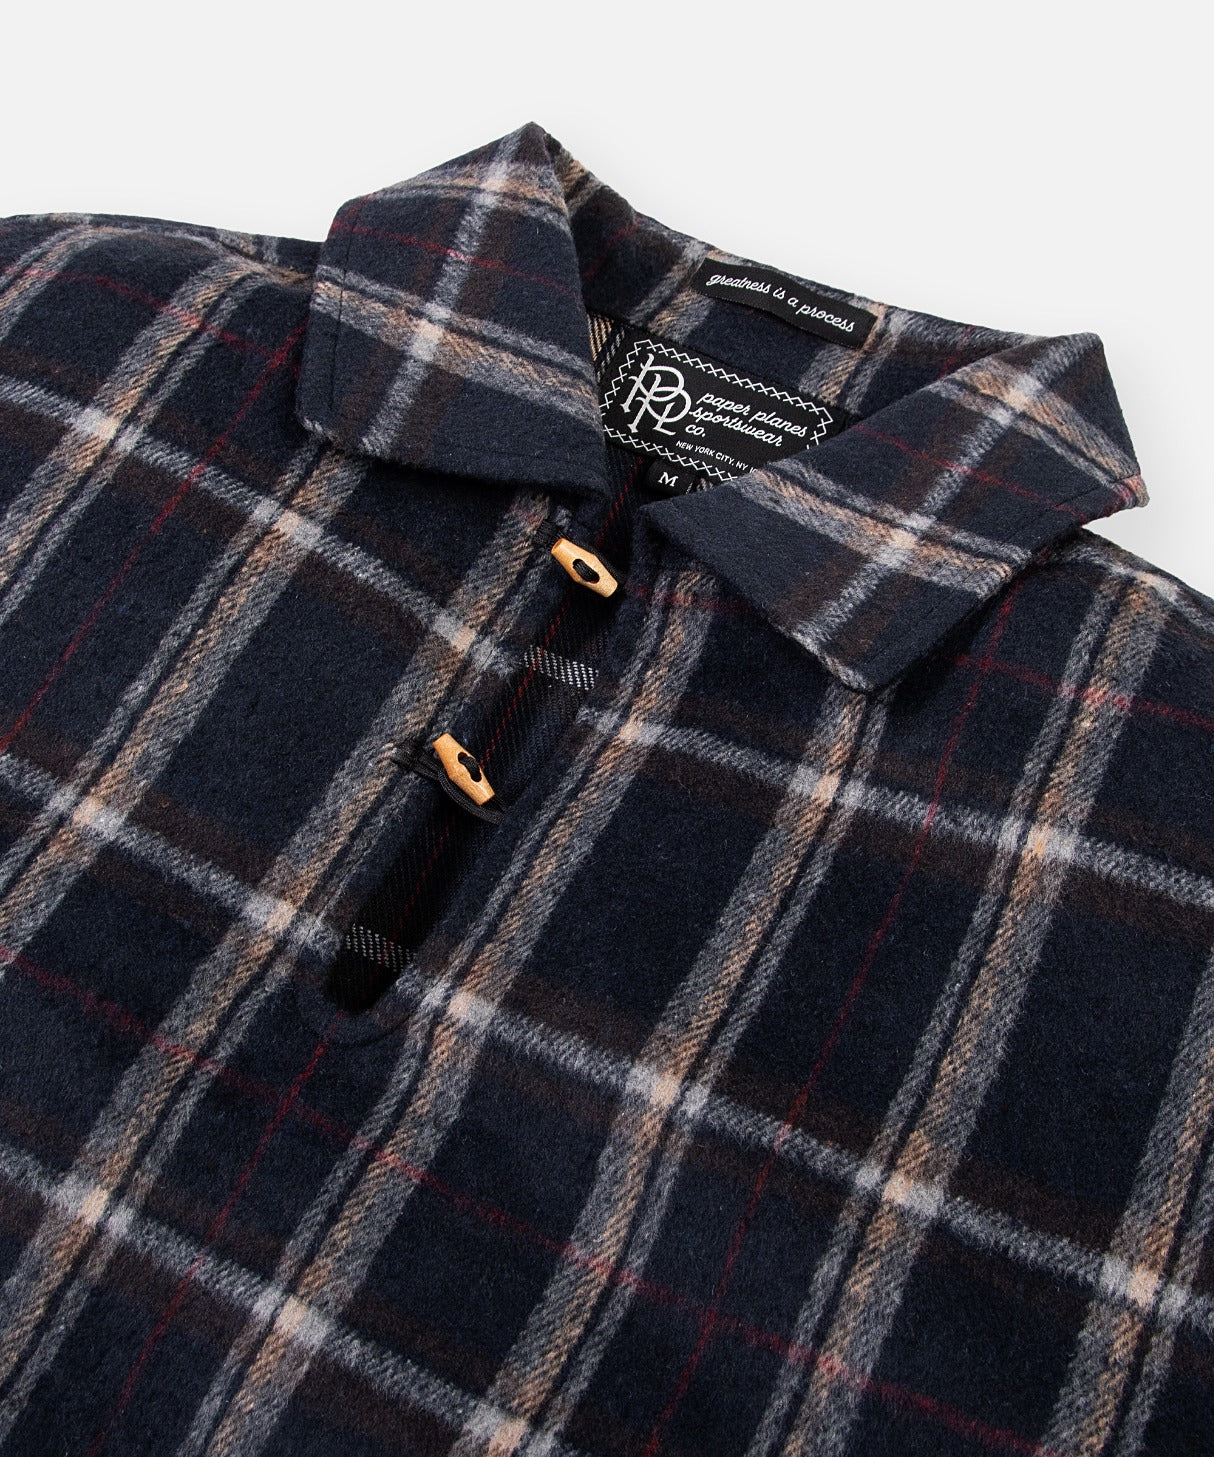 CUSTOM_ALT_TEXT: Collar with split neck and wooden toggle closure on Paper Planes Plaid Brushed Flannel Tunic.